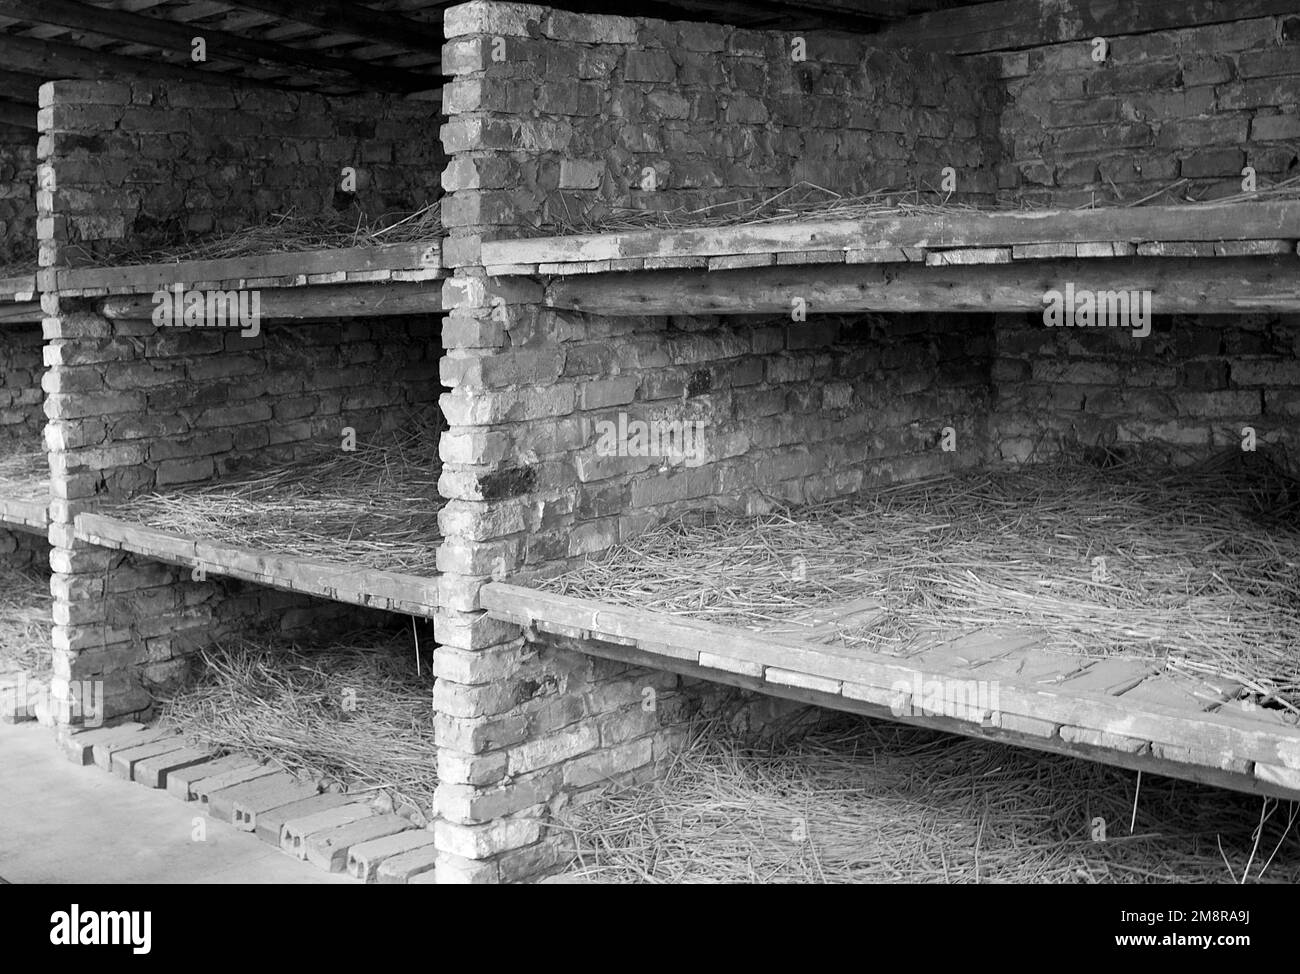 Inmate berths at Birkenhau nazi concentration camp in Poland Stock Photo